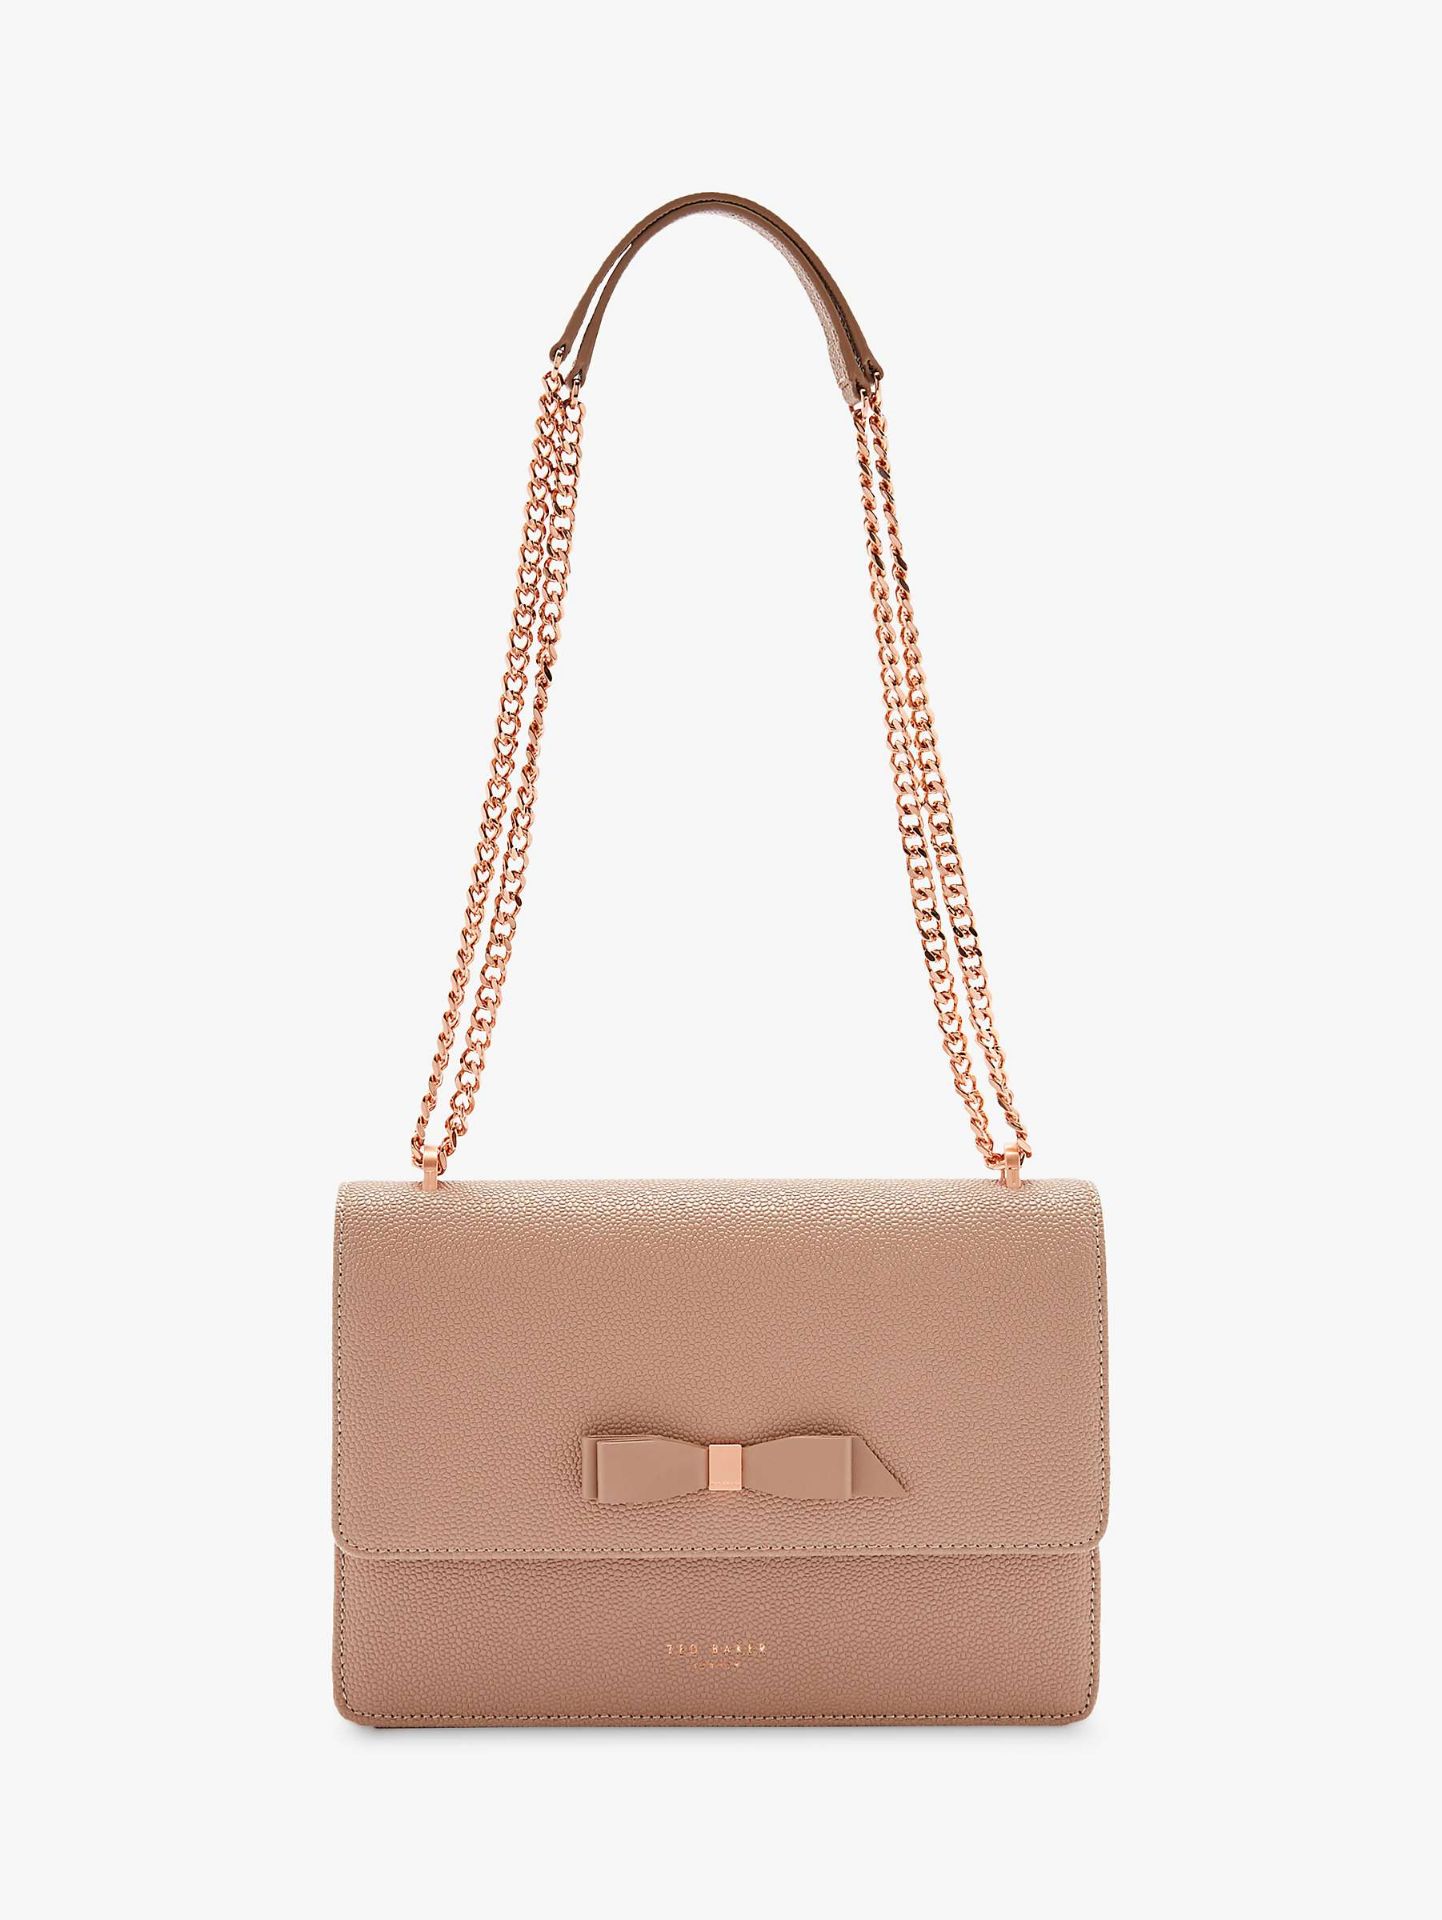 + VAT Brand New Ladies Leather Ted Baker Taupe Joanaa Bow Detail Cross Body Bag (ISP £129 Ted